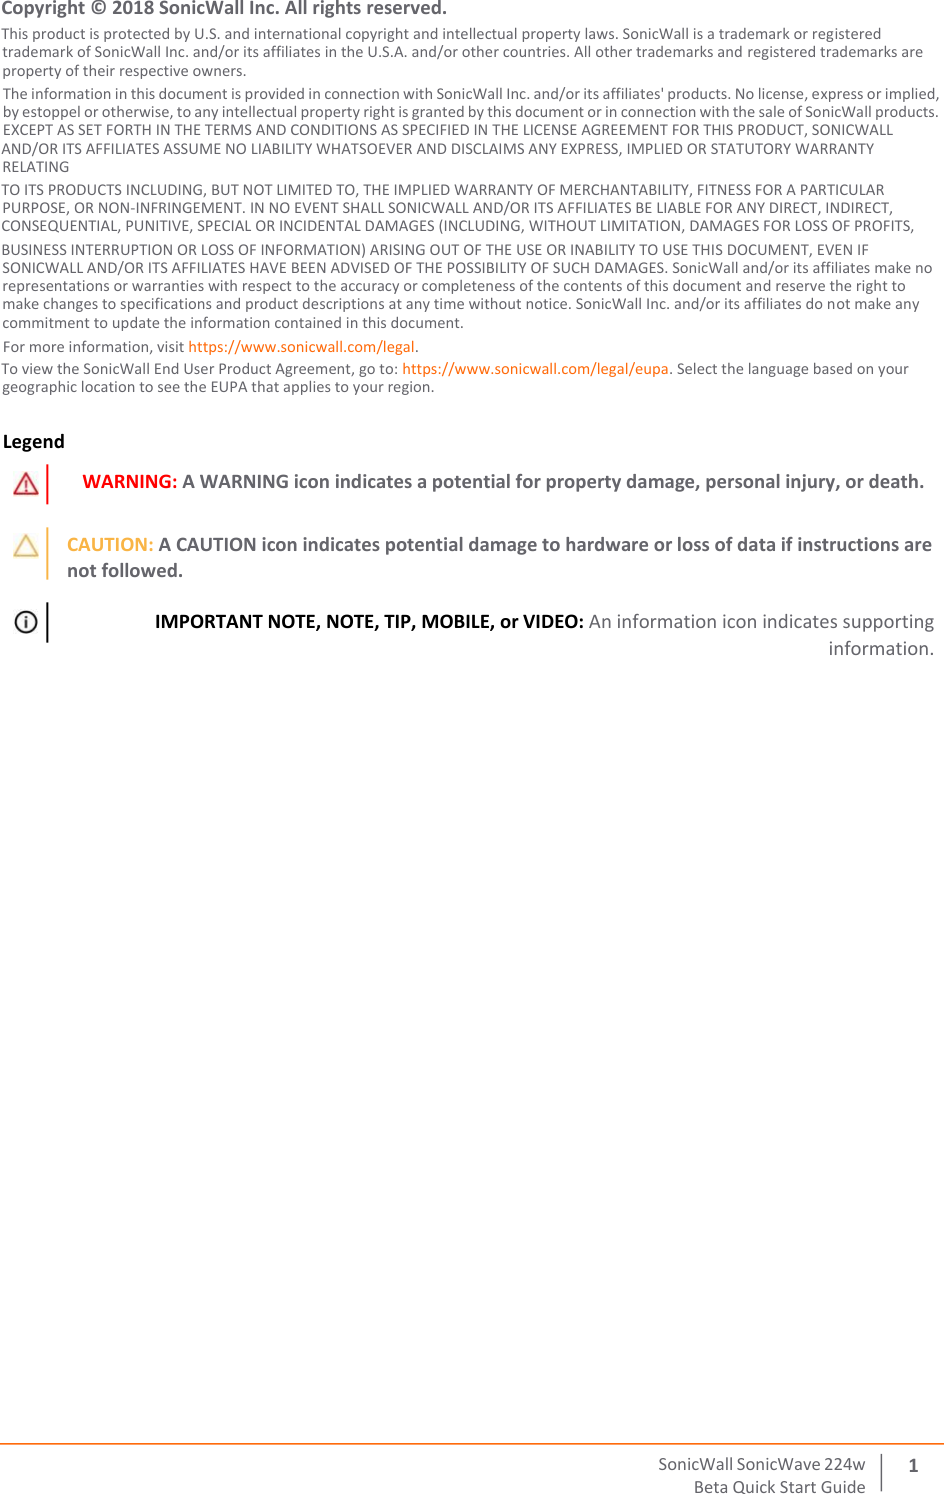  SonicWall   SonicWave   224 w Beta   Quick   Start   Guide 12  Copyright © 2018 SonicWall Inc. All rights reserved. This product is protected by U.S. and international copyright and intellectual property laws. SonicWall is a trademark or registered trademark of SonicWall Inc. and/or its affiliates in the U.S.A. and/or other countries. All other trademarks and registered trademarks are property of their respective owners. The information in this document is provided in connection with SonicWall Inc. and/or its affiliates&apos; products. No license, express or implied, by estoppel or otherwise, to any intellectual property right is granted by this document or in connection with the sale of SonicWall products. EXCEPT AS SET FORTH IN THE TERMS AND CONDITIONS AS SPECIFIED IN THE LICENSE AGREEMENT FOR THIS PRODUCT, SONICWALL  AND/OR ITS AFFILIATES ASSUME NO LIABILITY WHATSOEVER AND DISCLAIMS ANY EXPRESS, IMPLIED OR STATUTORY WARRANTY RELATING  TO ITS PRODUCTS INCLUDING, BUT NOT LIMITED TO, THE IMPLIED WARRANTY OF MERCHANTABILITY, FITNESS FOR A PARTICULAR PURPOSE, OR NON‐INFRINGEMENT. IN NO EVENT SHALL SONICWALL AND/OR ITS AFFILIATES BE LIABLE FOR ANY DIRECT, INDIRECT,  CONSEQUENTIAL, PUNITIVE, SPECIAL OR INCIDENTAL DAMAGES (INCLUDING, WITHOUT LIMITATION, DAMAGES FOR LOSS OF PROFITS,  BUSINESS INTERRUPTION OR LOSS OF INFORMATION) ARISING OUT OF THE USE OR INABILITY TO USE THIS DOCUMENT, EVEN IF SONICWALL AND/OR ITS AFFILIATES HAVE BEEN ADVISED OF THE POSSIBILITY OF SUCH DAMAGES. SonicWall and/or its affiliates make no representations or warranties with respect to the accuracy or completeness of the contents of this document and reserve the right to make changes to specifications and product descriptions at any time without notice. SonicWall Inc. and/or its affiliates do not make any commitment to update the information contained in this document. For more information, visit https://www.sonicwall.com/legal. To view the SonicWall End User Product Agreement, go to: https://www.sonicwall.com/legal/eupa. Select the language based on your geographic location to see the EUPA that applies to your region. Legend WARNING: A WARNING icon indicates a potential for property damage, personal injury, or death. CAUTION: A CAUTION icon indicates potential damage to hardware or loss of data if instructions are not followed. IMPORTANT NOTE, NOTE, TIP, MOBILE, or VIDEO: An information icon indicates supporting information. 